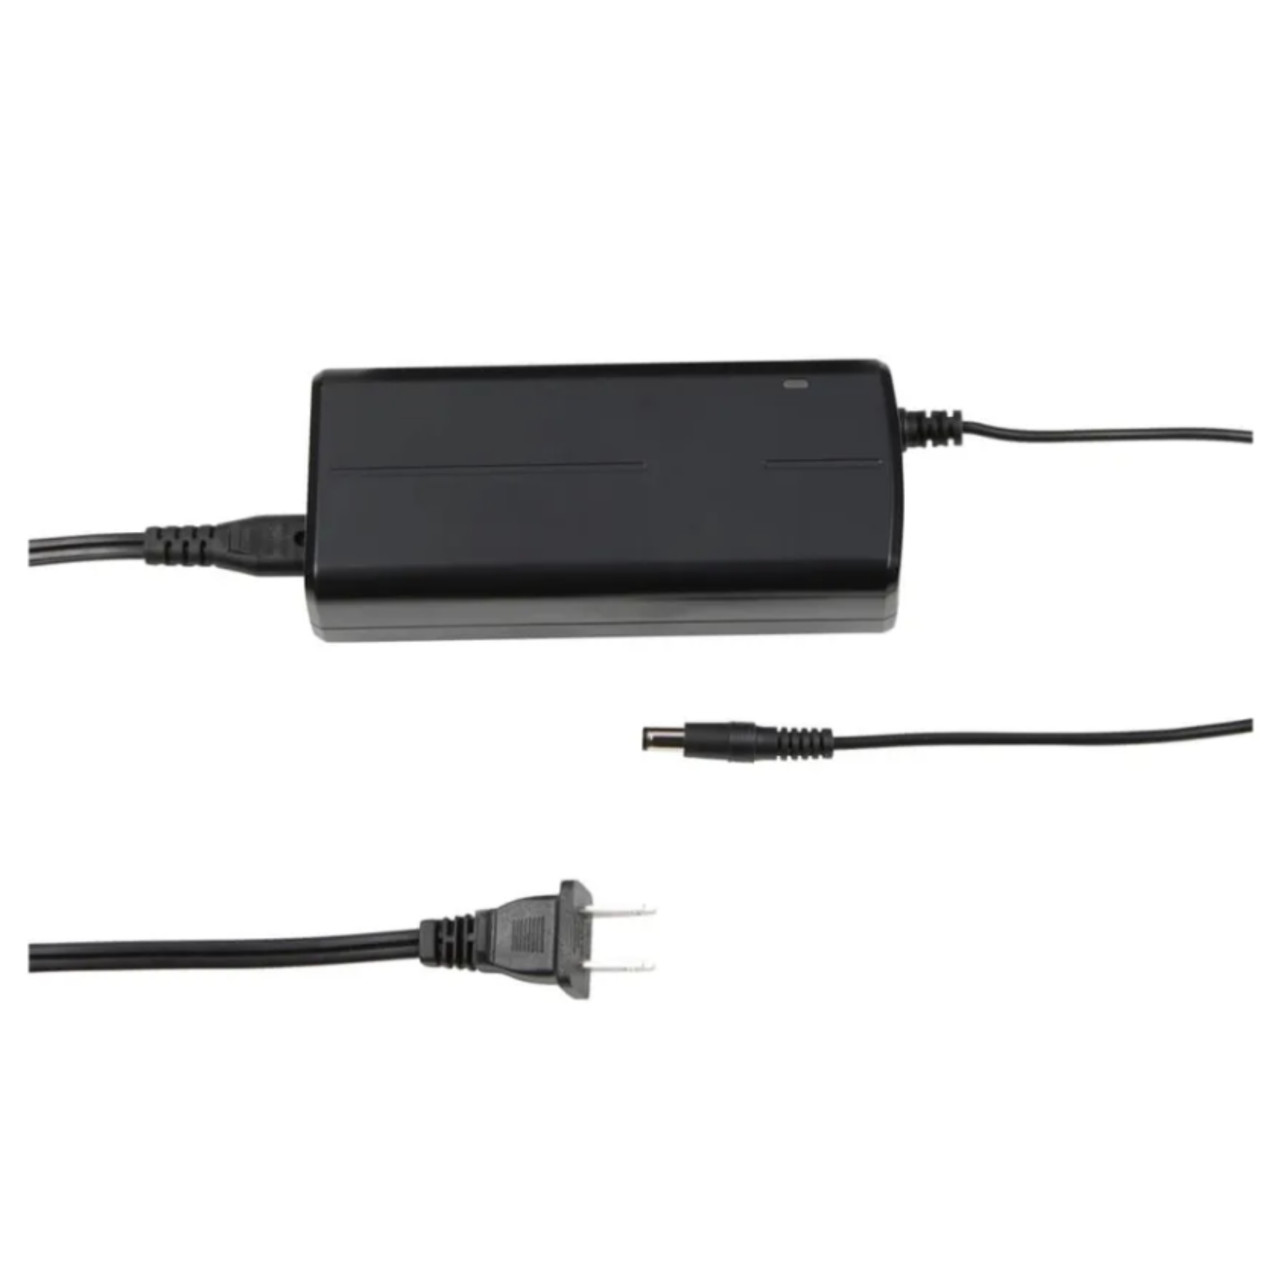 Garmin New OEM Charger for Lithium-Ion Battery, 010-13140-05